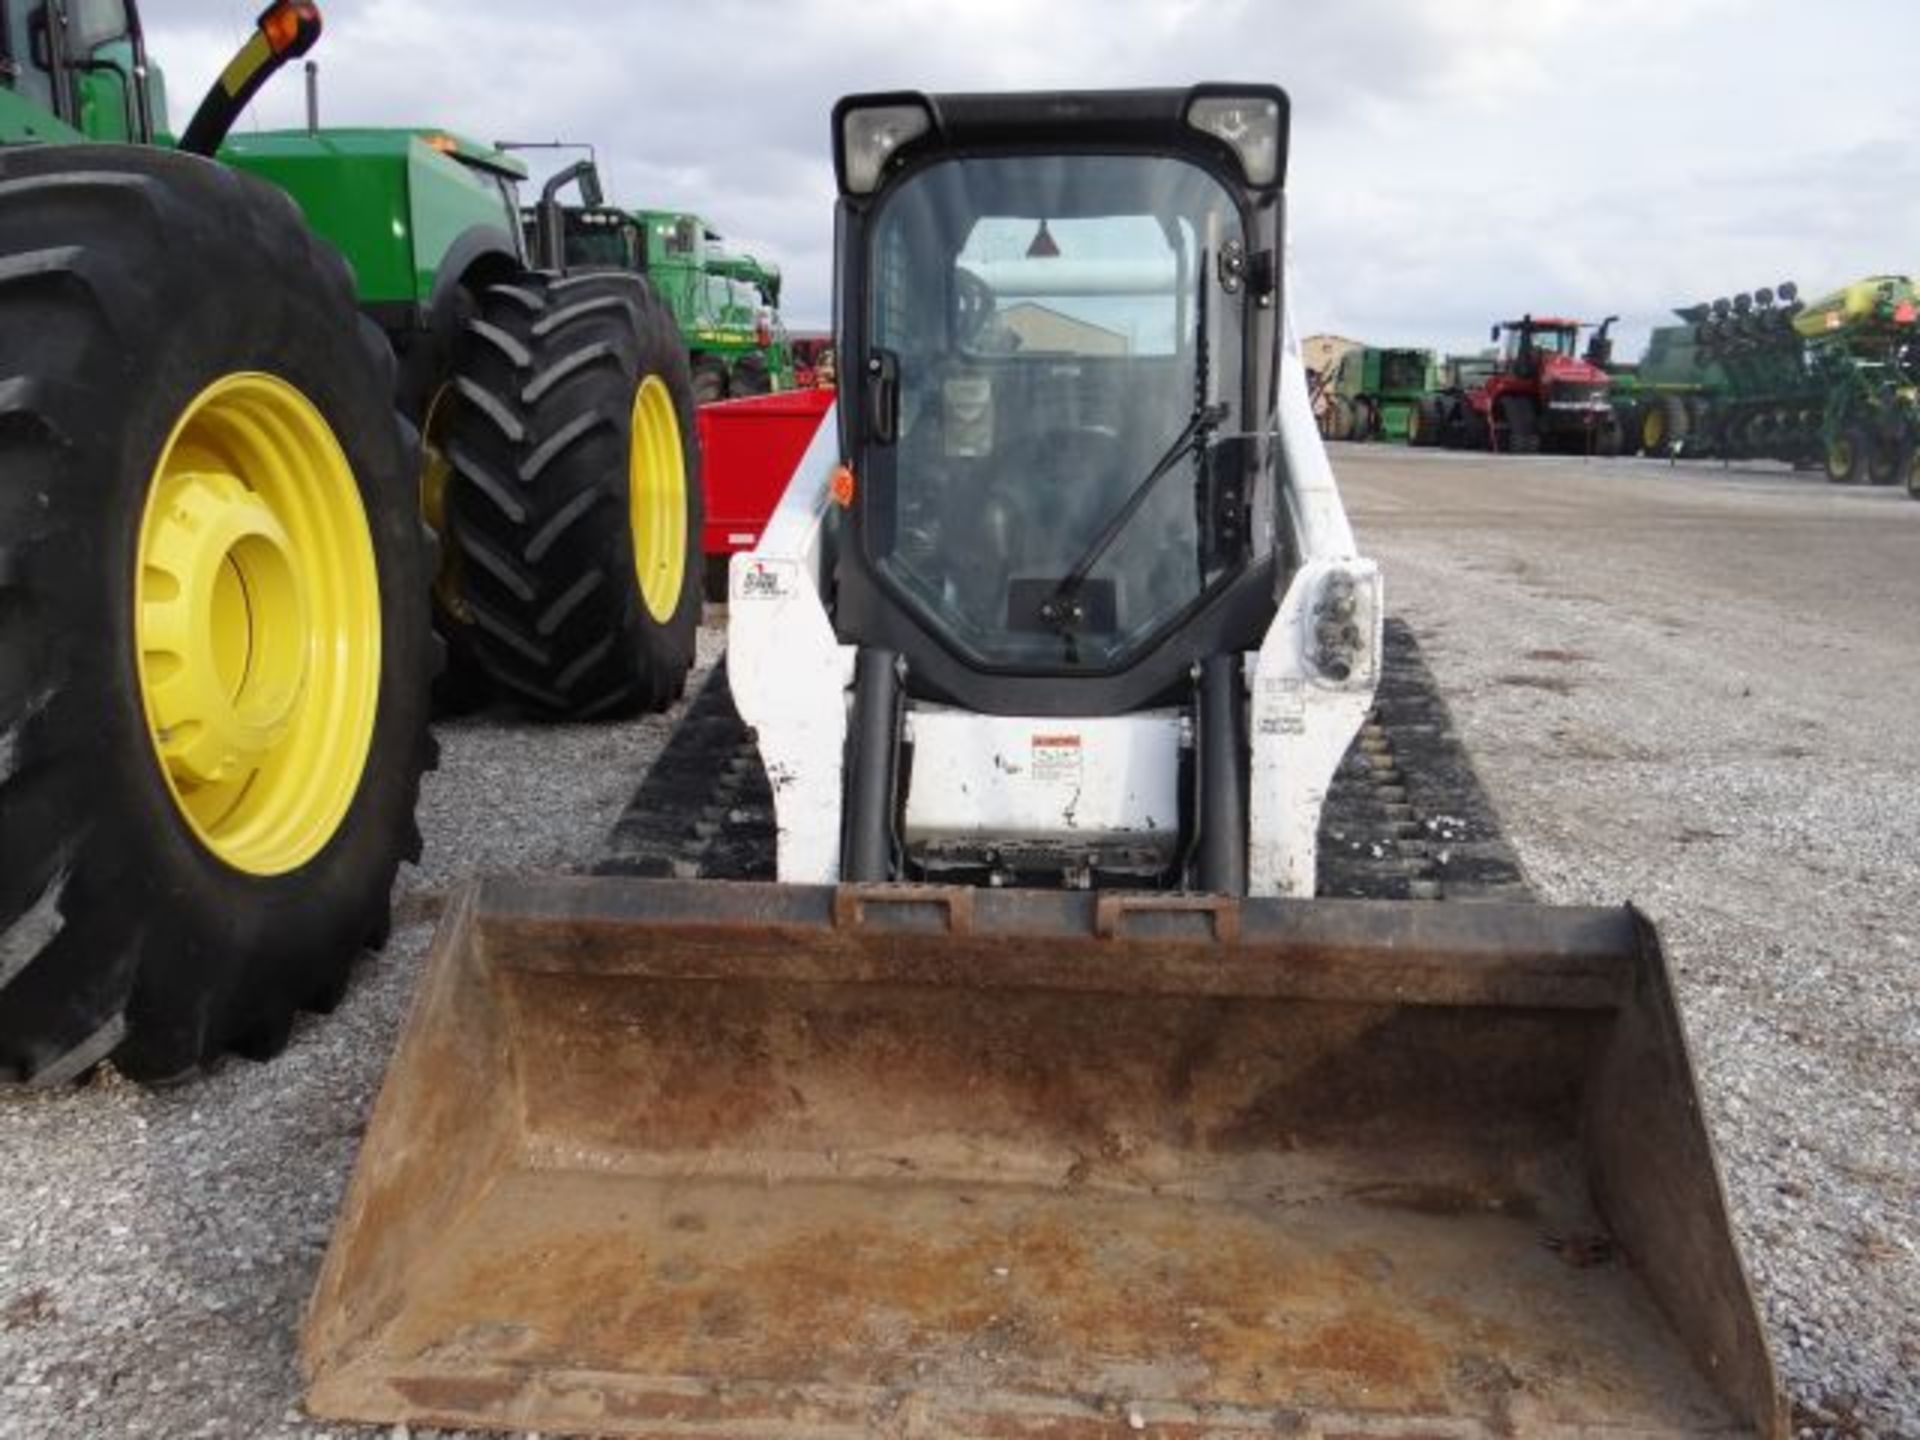 Bobcat T750, 2014 #158901, CTL, Cab w/ AC and Heat, Joystick Controls Switchable From ISO and H - Image 3 of 6